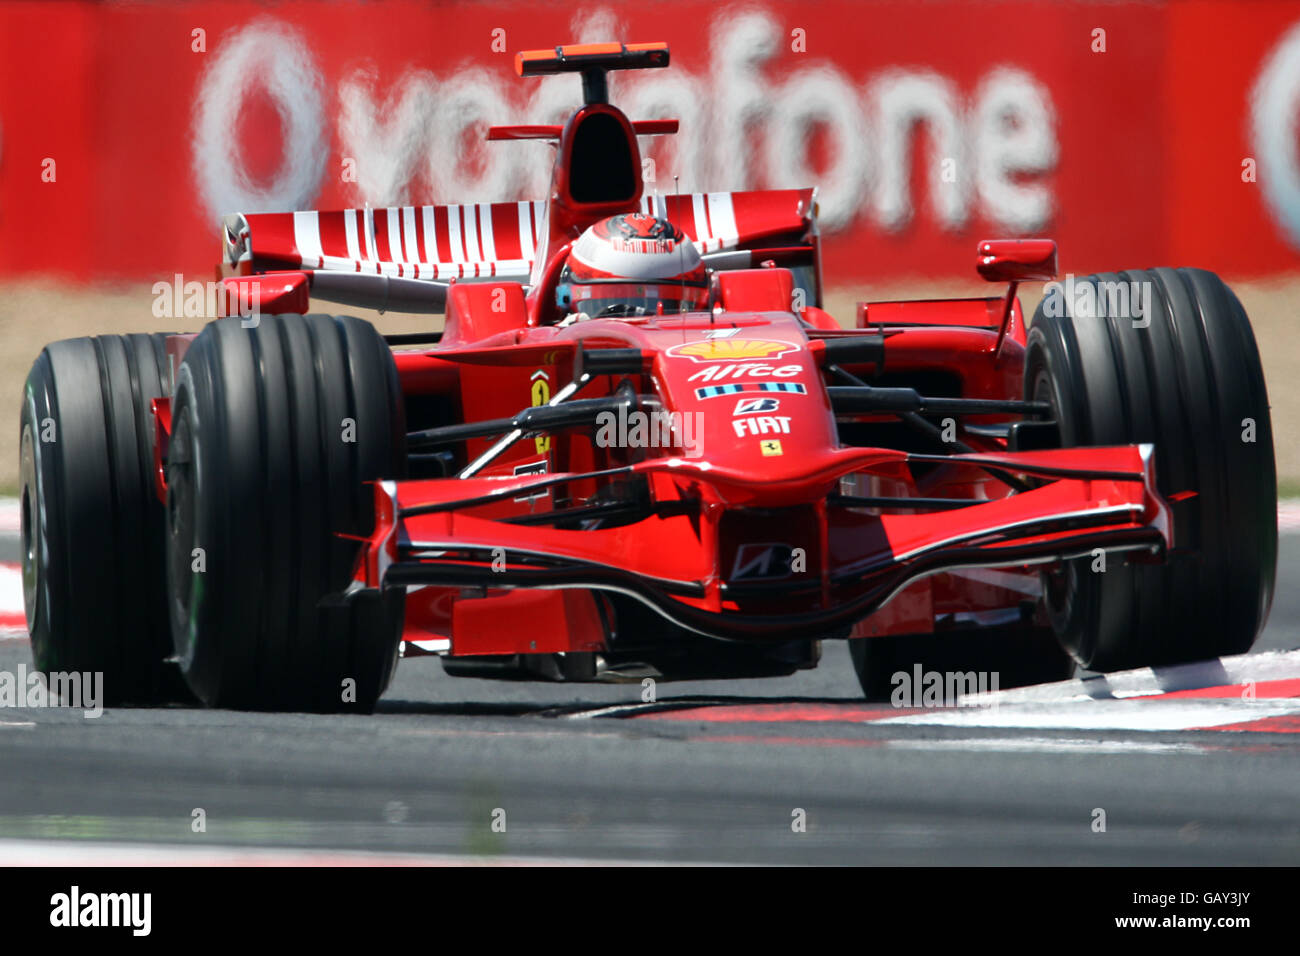 Ferrari's Kimi Raikkonen during qualifying for the Grand Prix at Magny-Cours, Nevers, France. Stock Photo